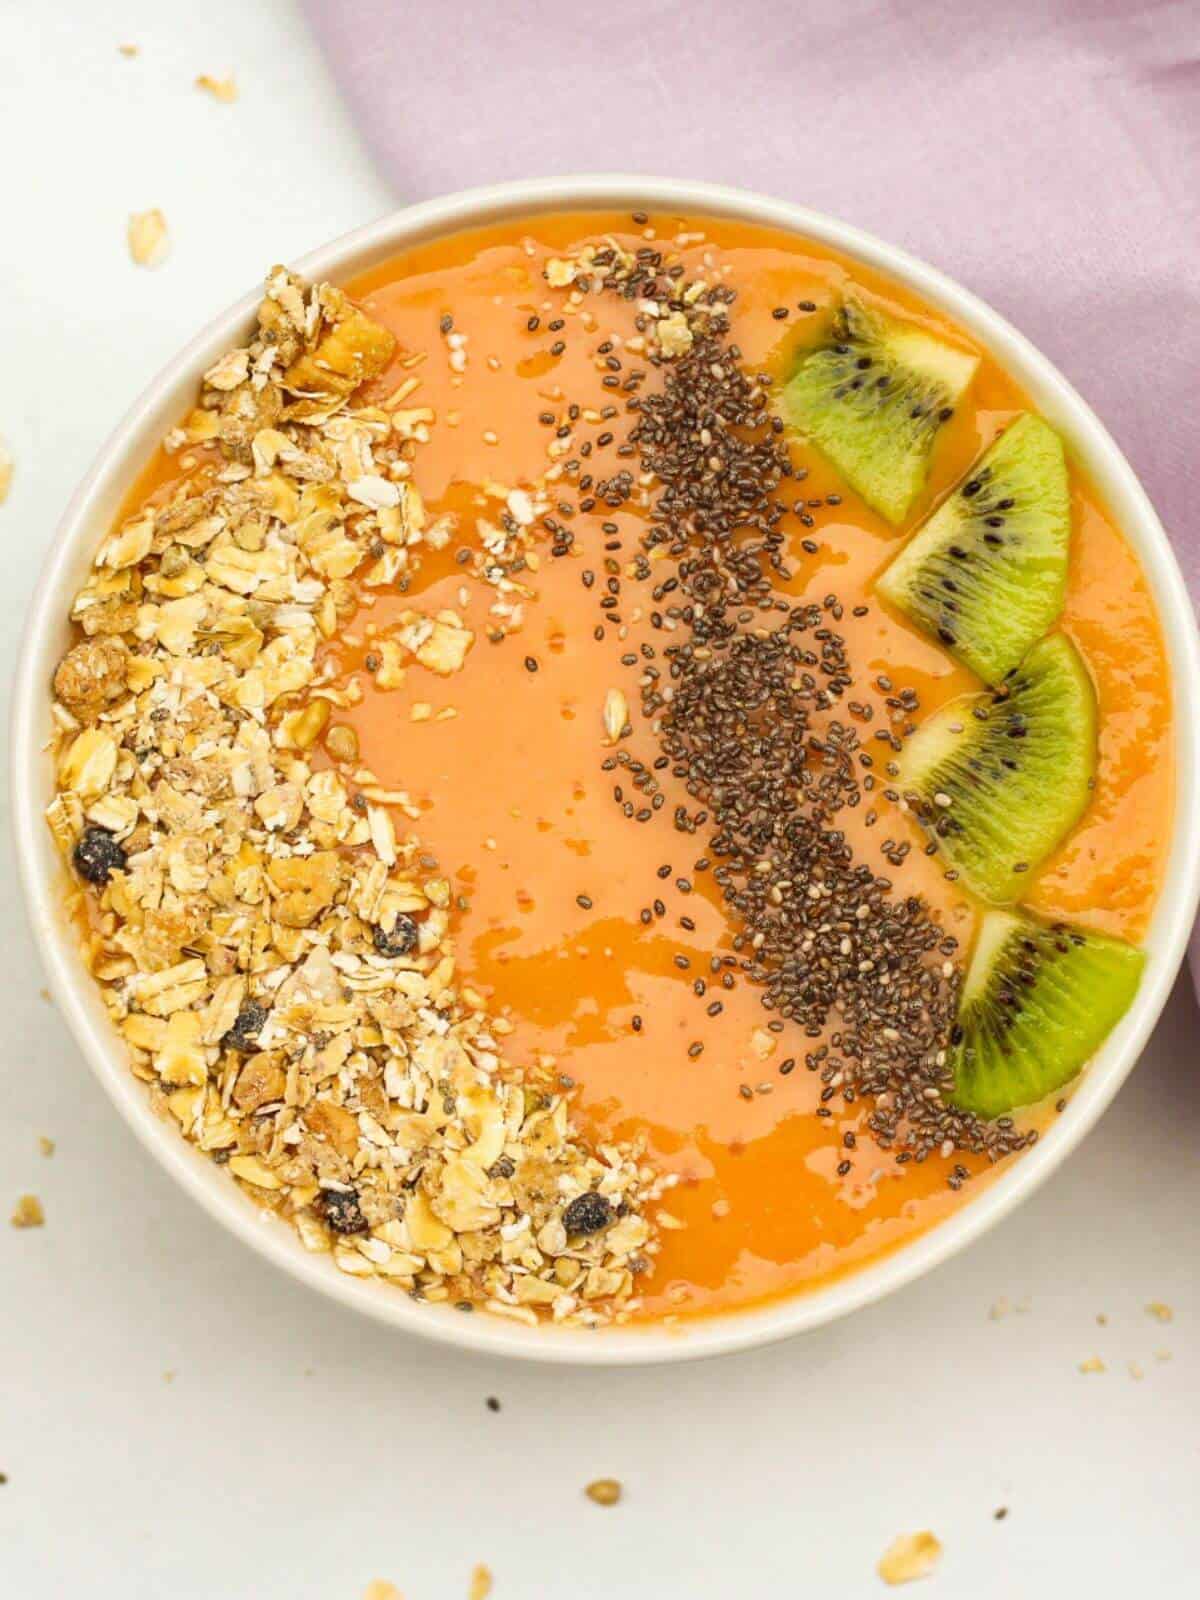 Overhead shot of a white bowl filled with orange papaya smothie. The smoothie is topped with oat muesly, chia seeds, and slices of kiwi fruit. There is a purple towel on the white surface and some sprinkled dry oats all around the white bowl..